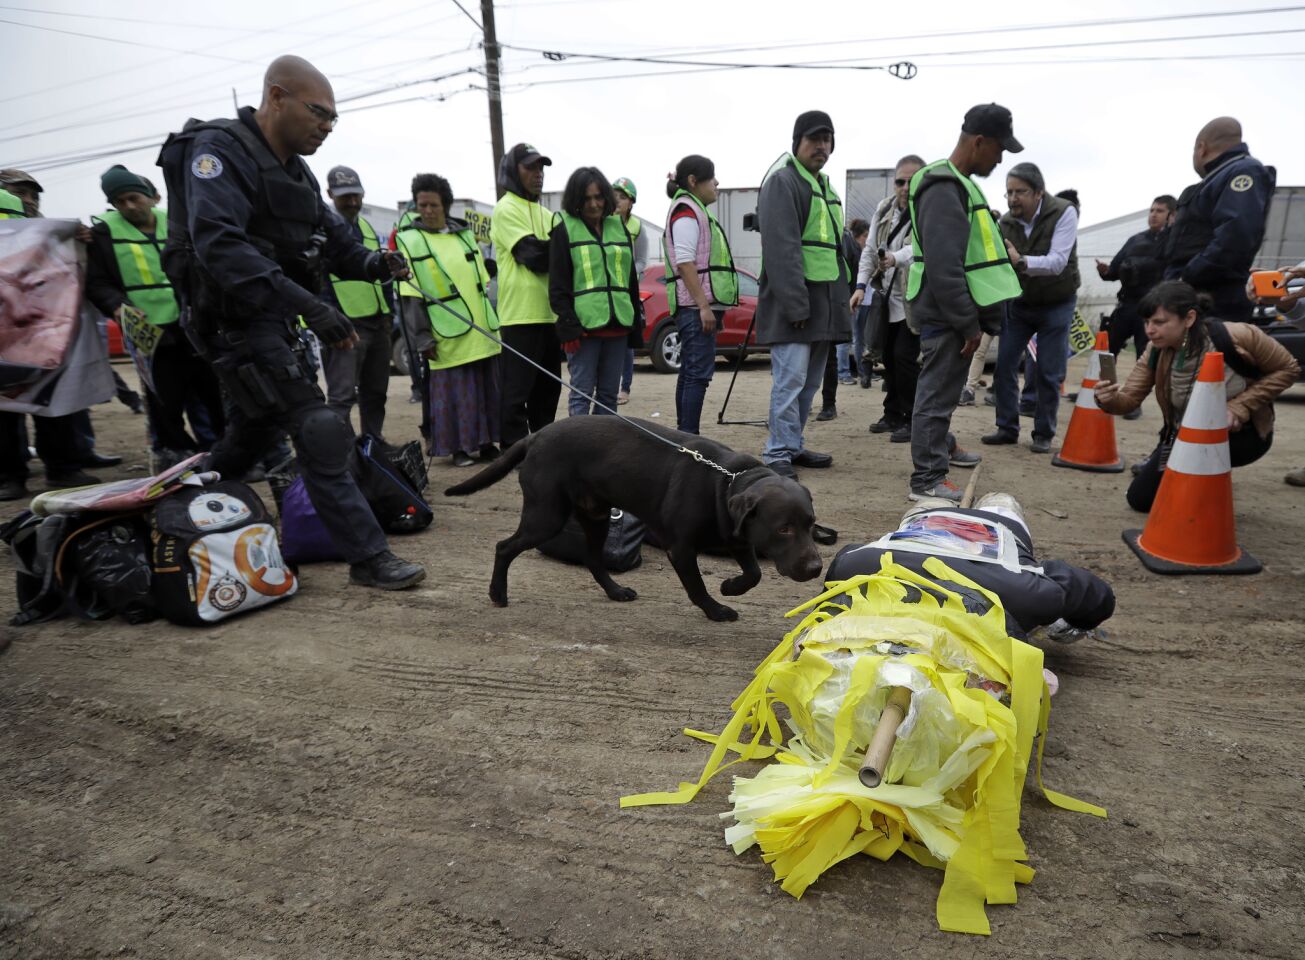 Police use a bomb-sniffing dog to inspect a piñata that protesters brought to an anti-Trump rally in Tijuana on March 13.